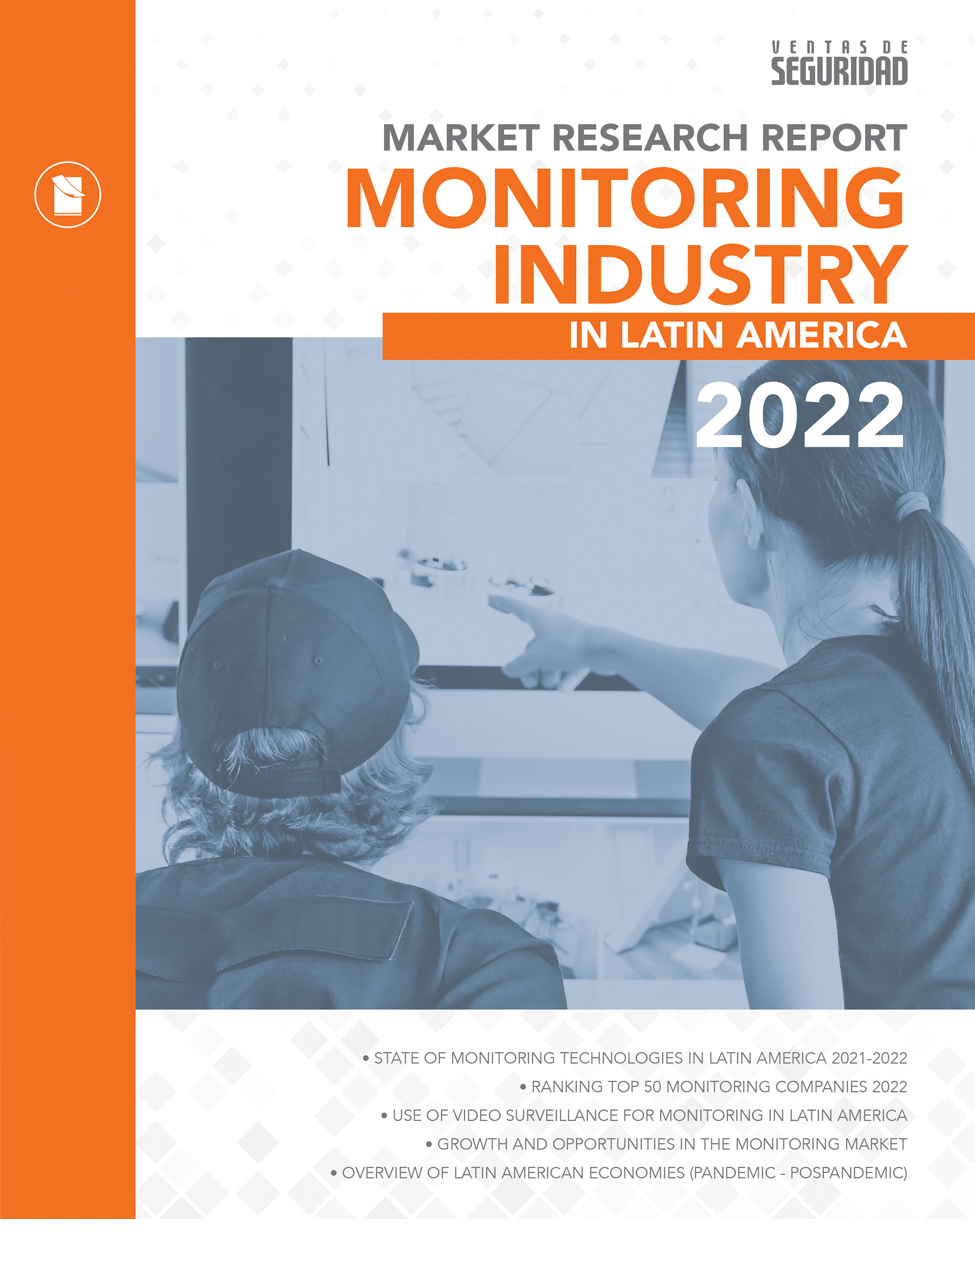 MARKET RESEARCH REPORT MONITORING INDUSTRY IN LATIN AMERICA 2022 Image